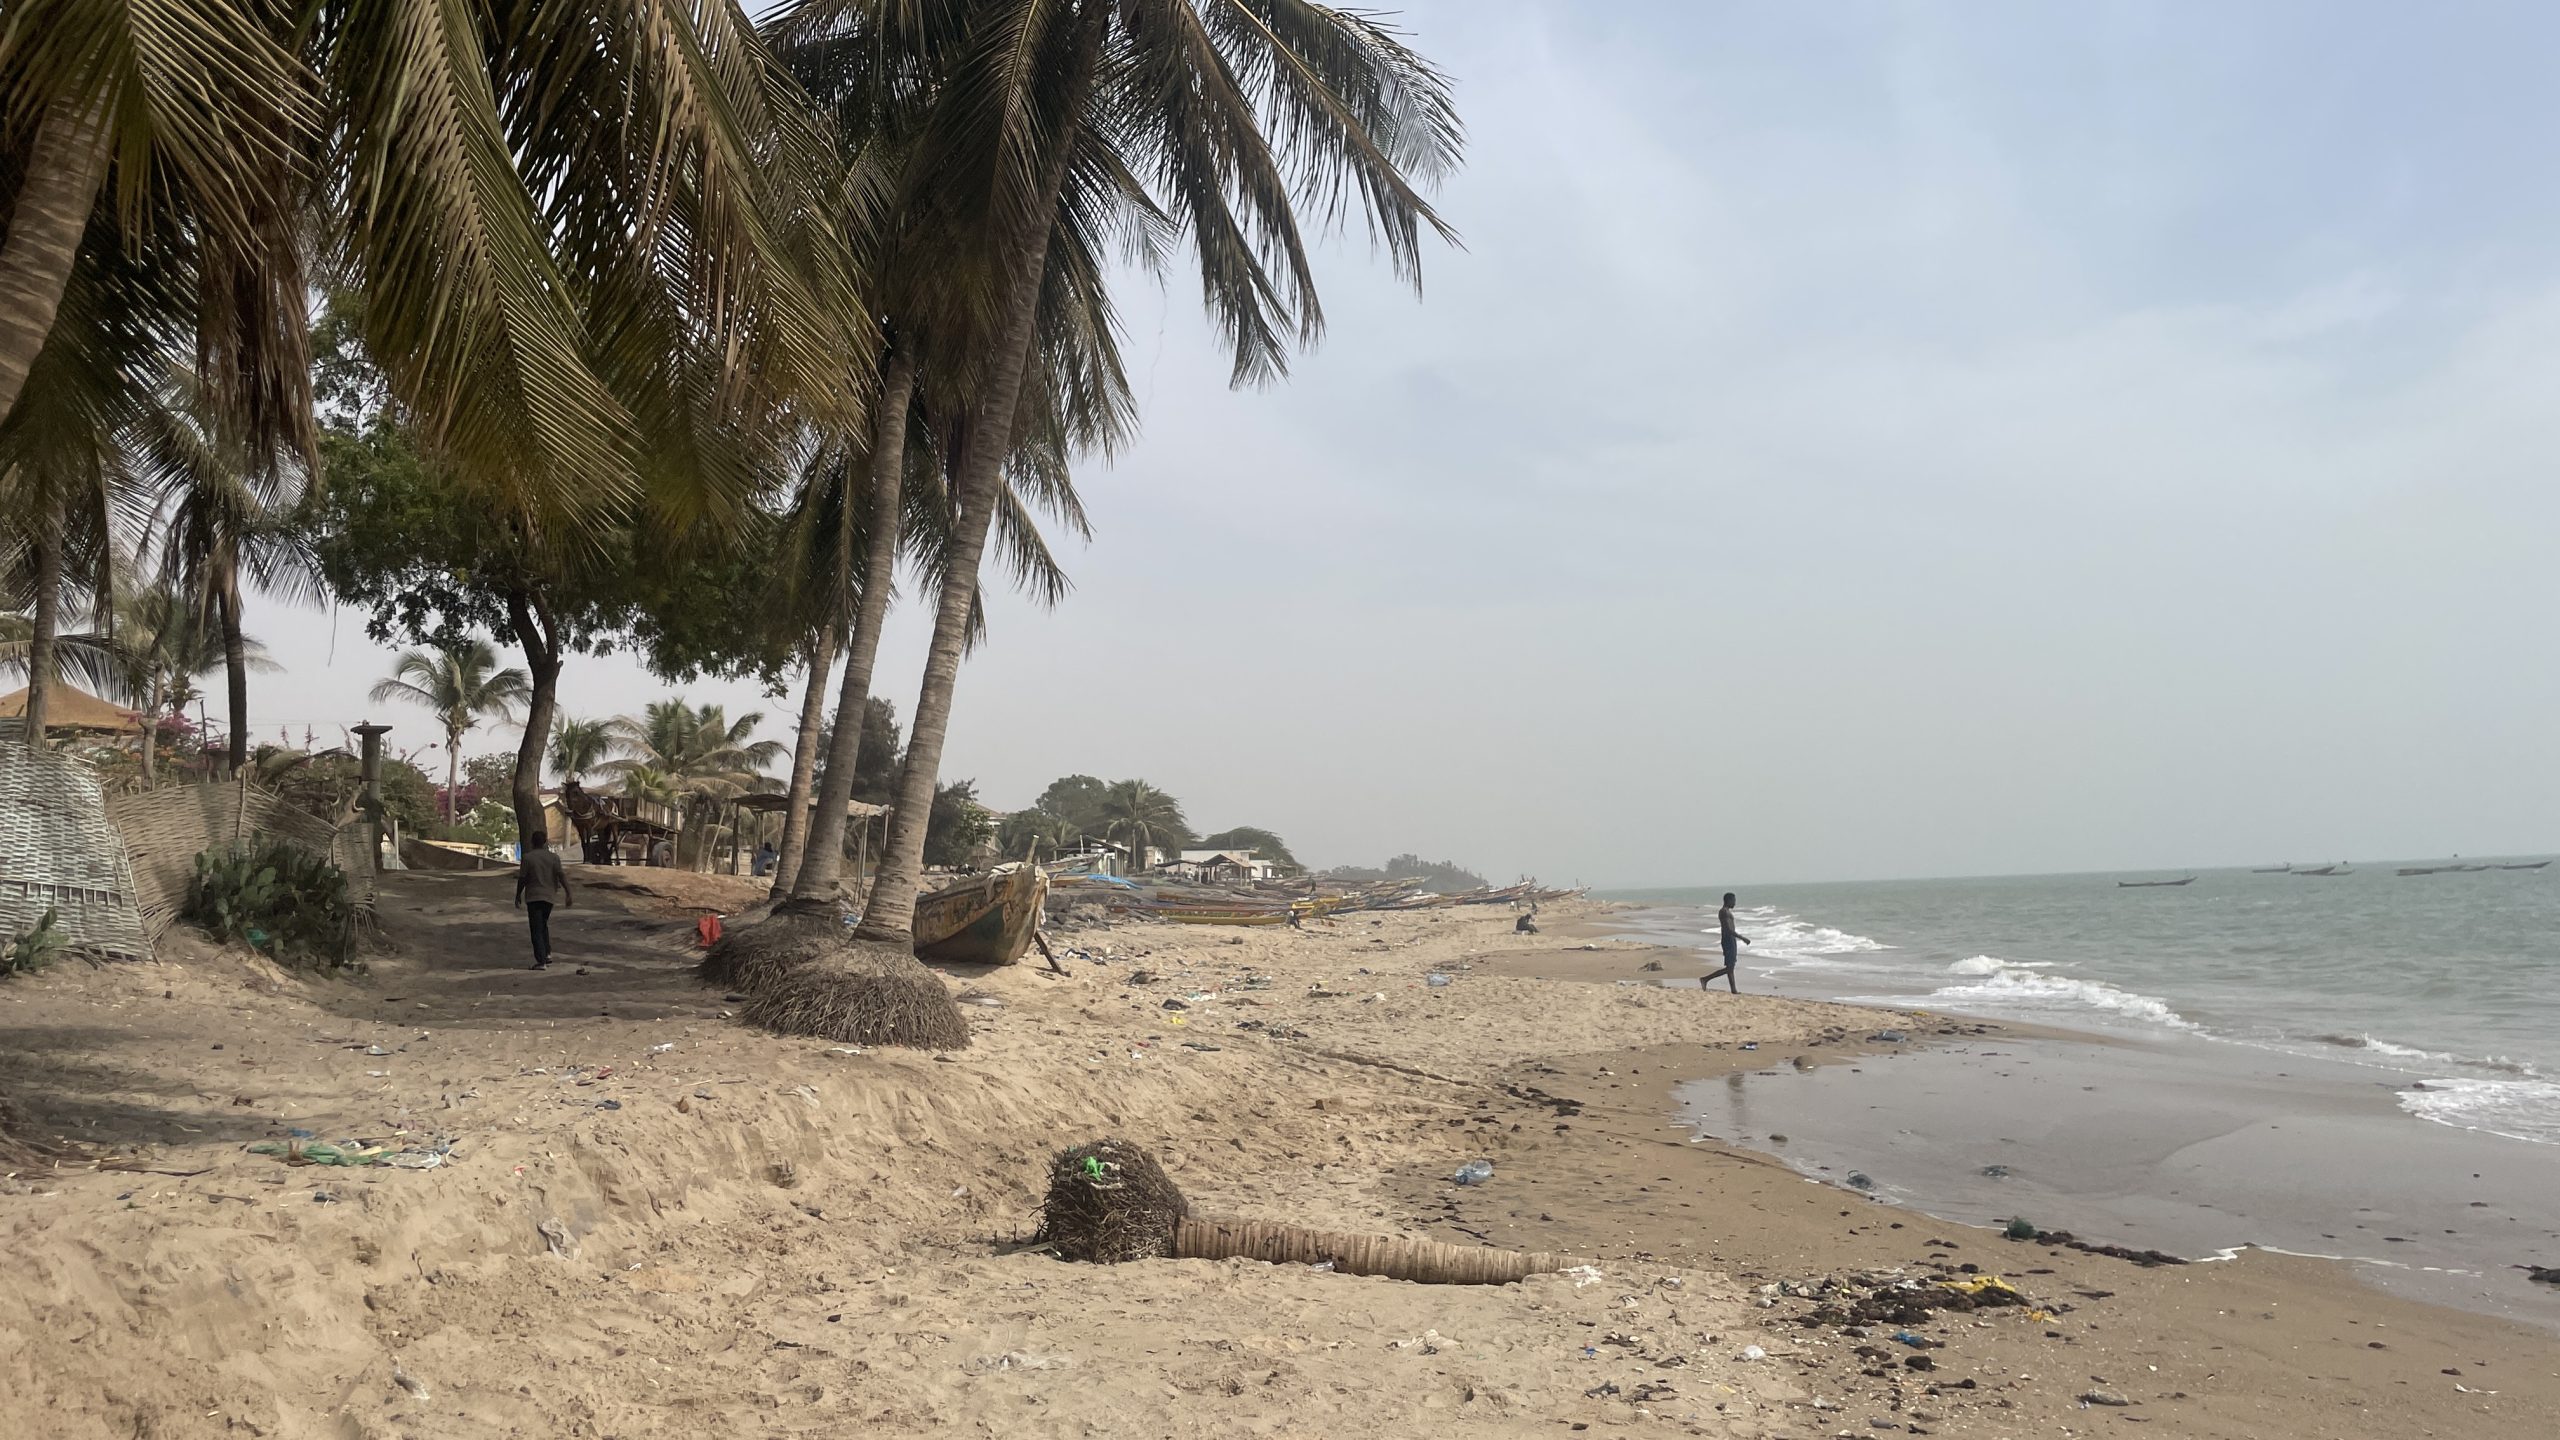 Palm tree roots are exposed due to coastal erosion in Mbour beach, Senegal, as climate change worsens impacts.